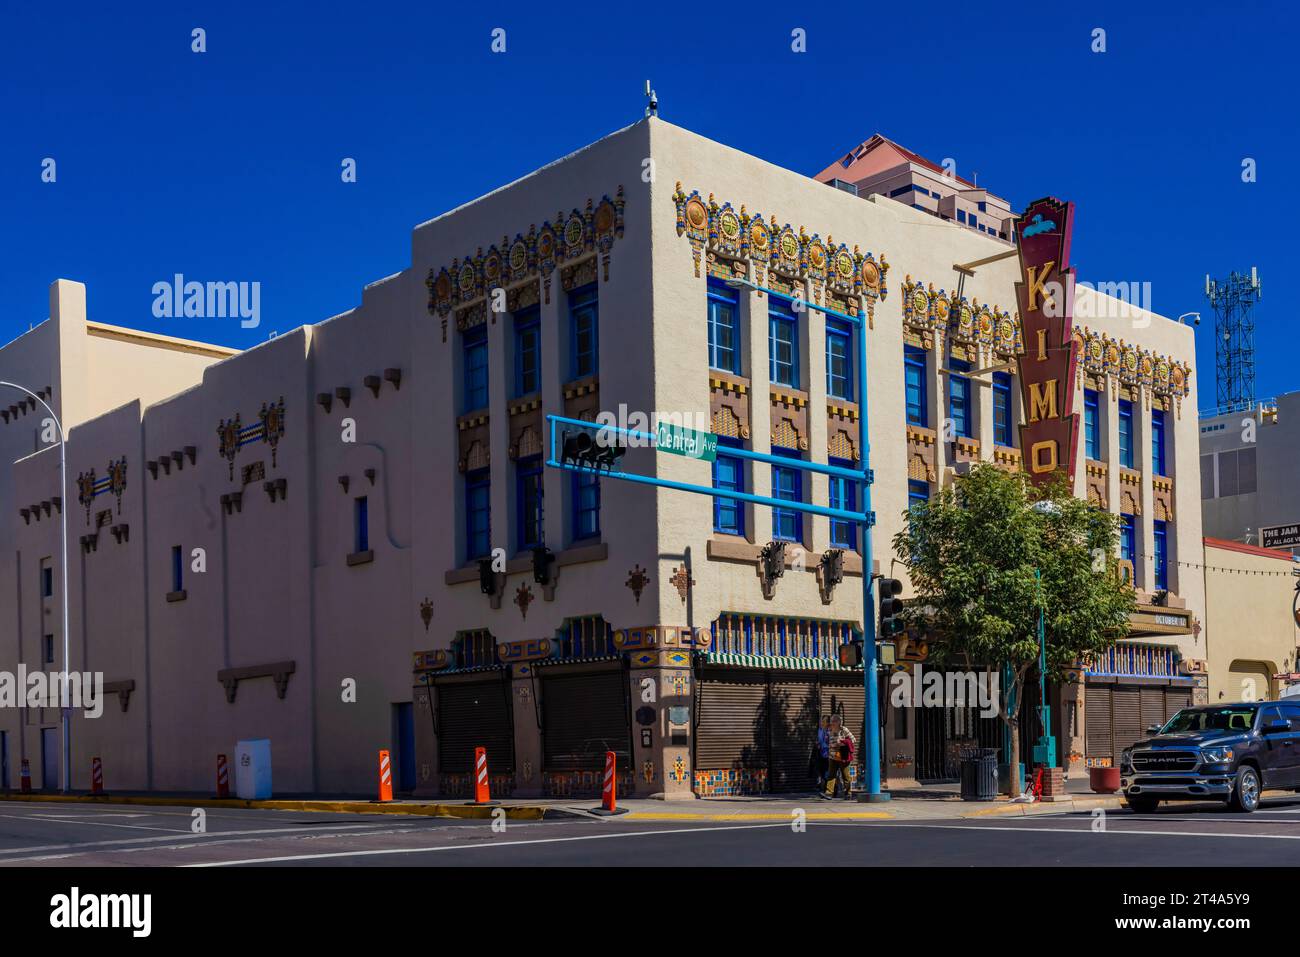 KiMo Theater along Route 66 in Albuquerque, New Mexico, USA [No property release; editorial licensing only] Stock Photo